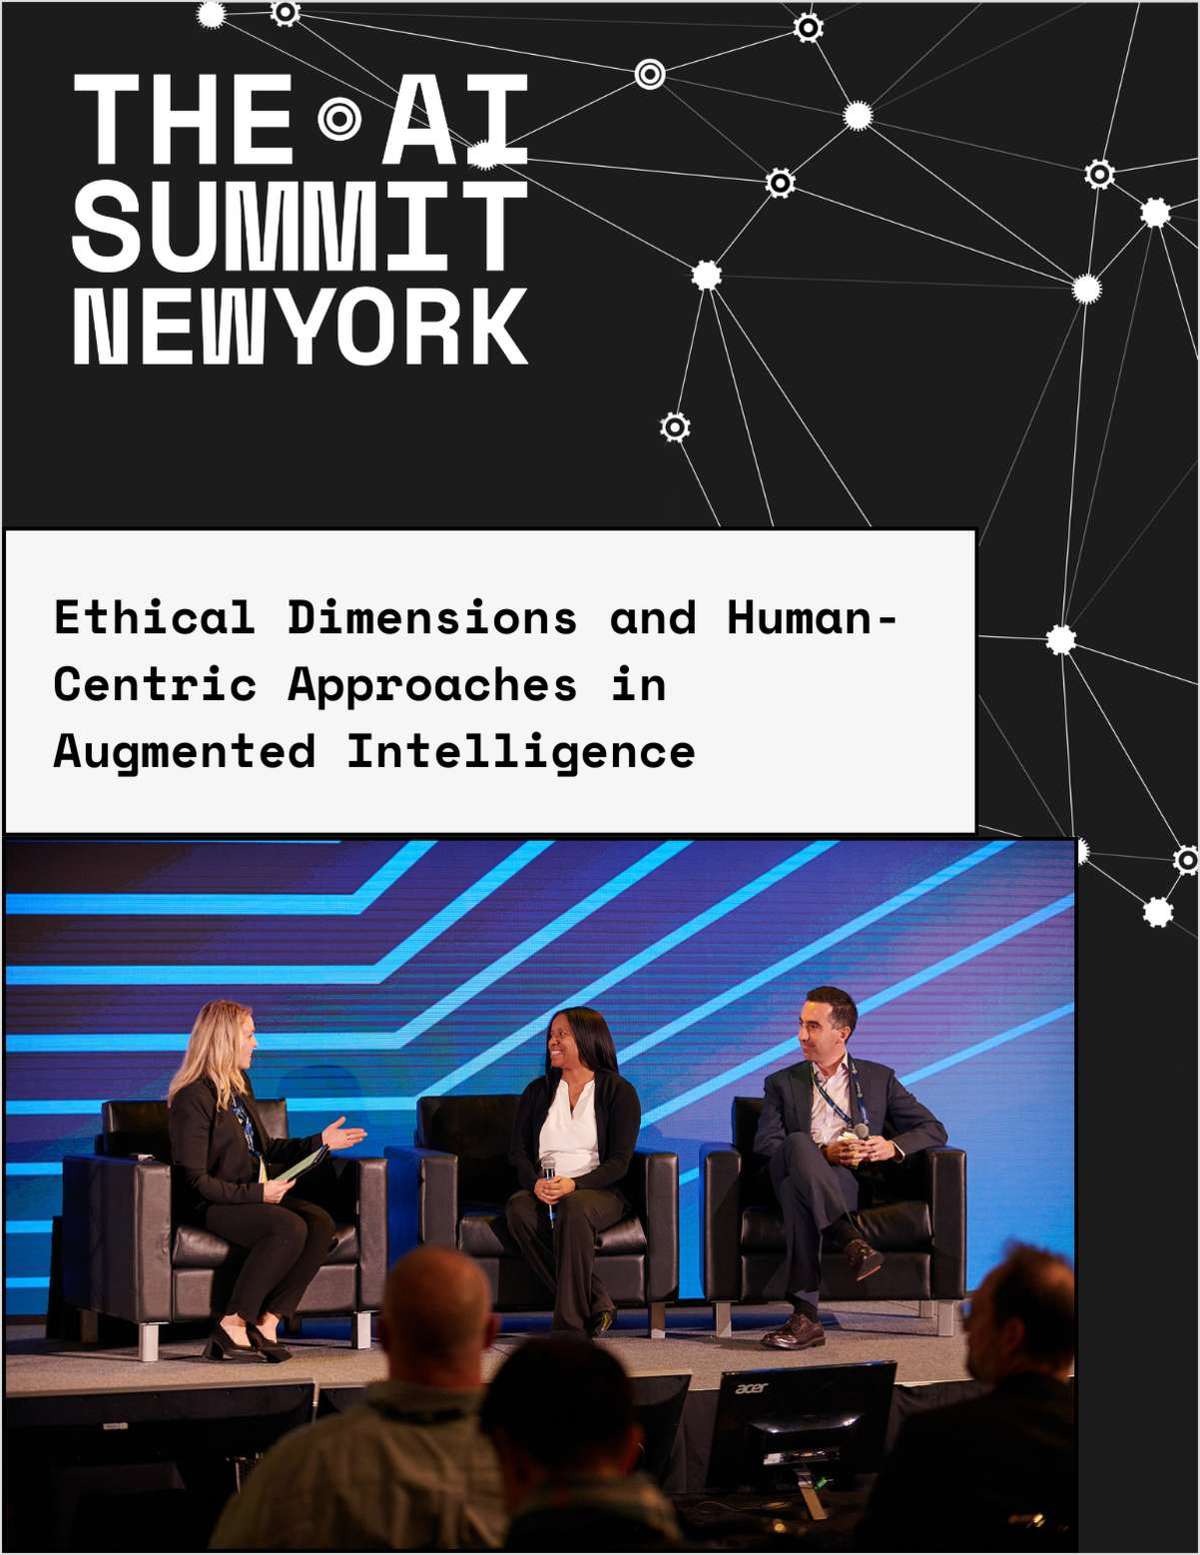 Ethical Dimensions and Human-Centric Approaches in Augmented Intelligence